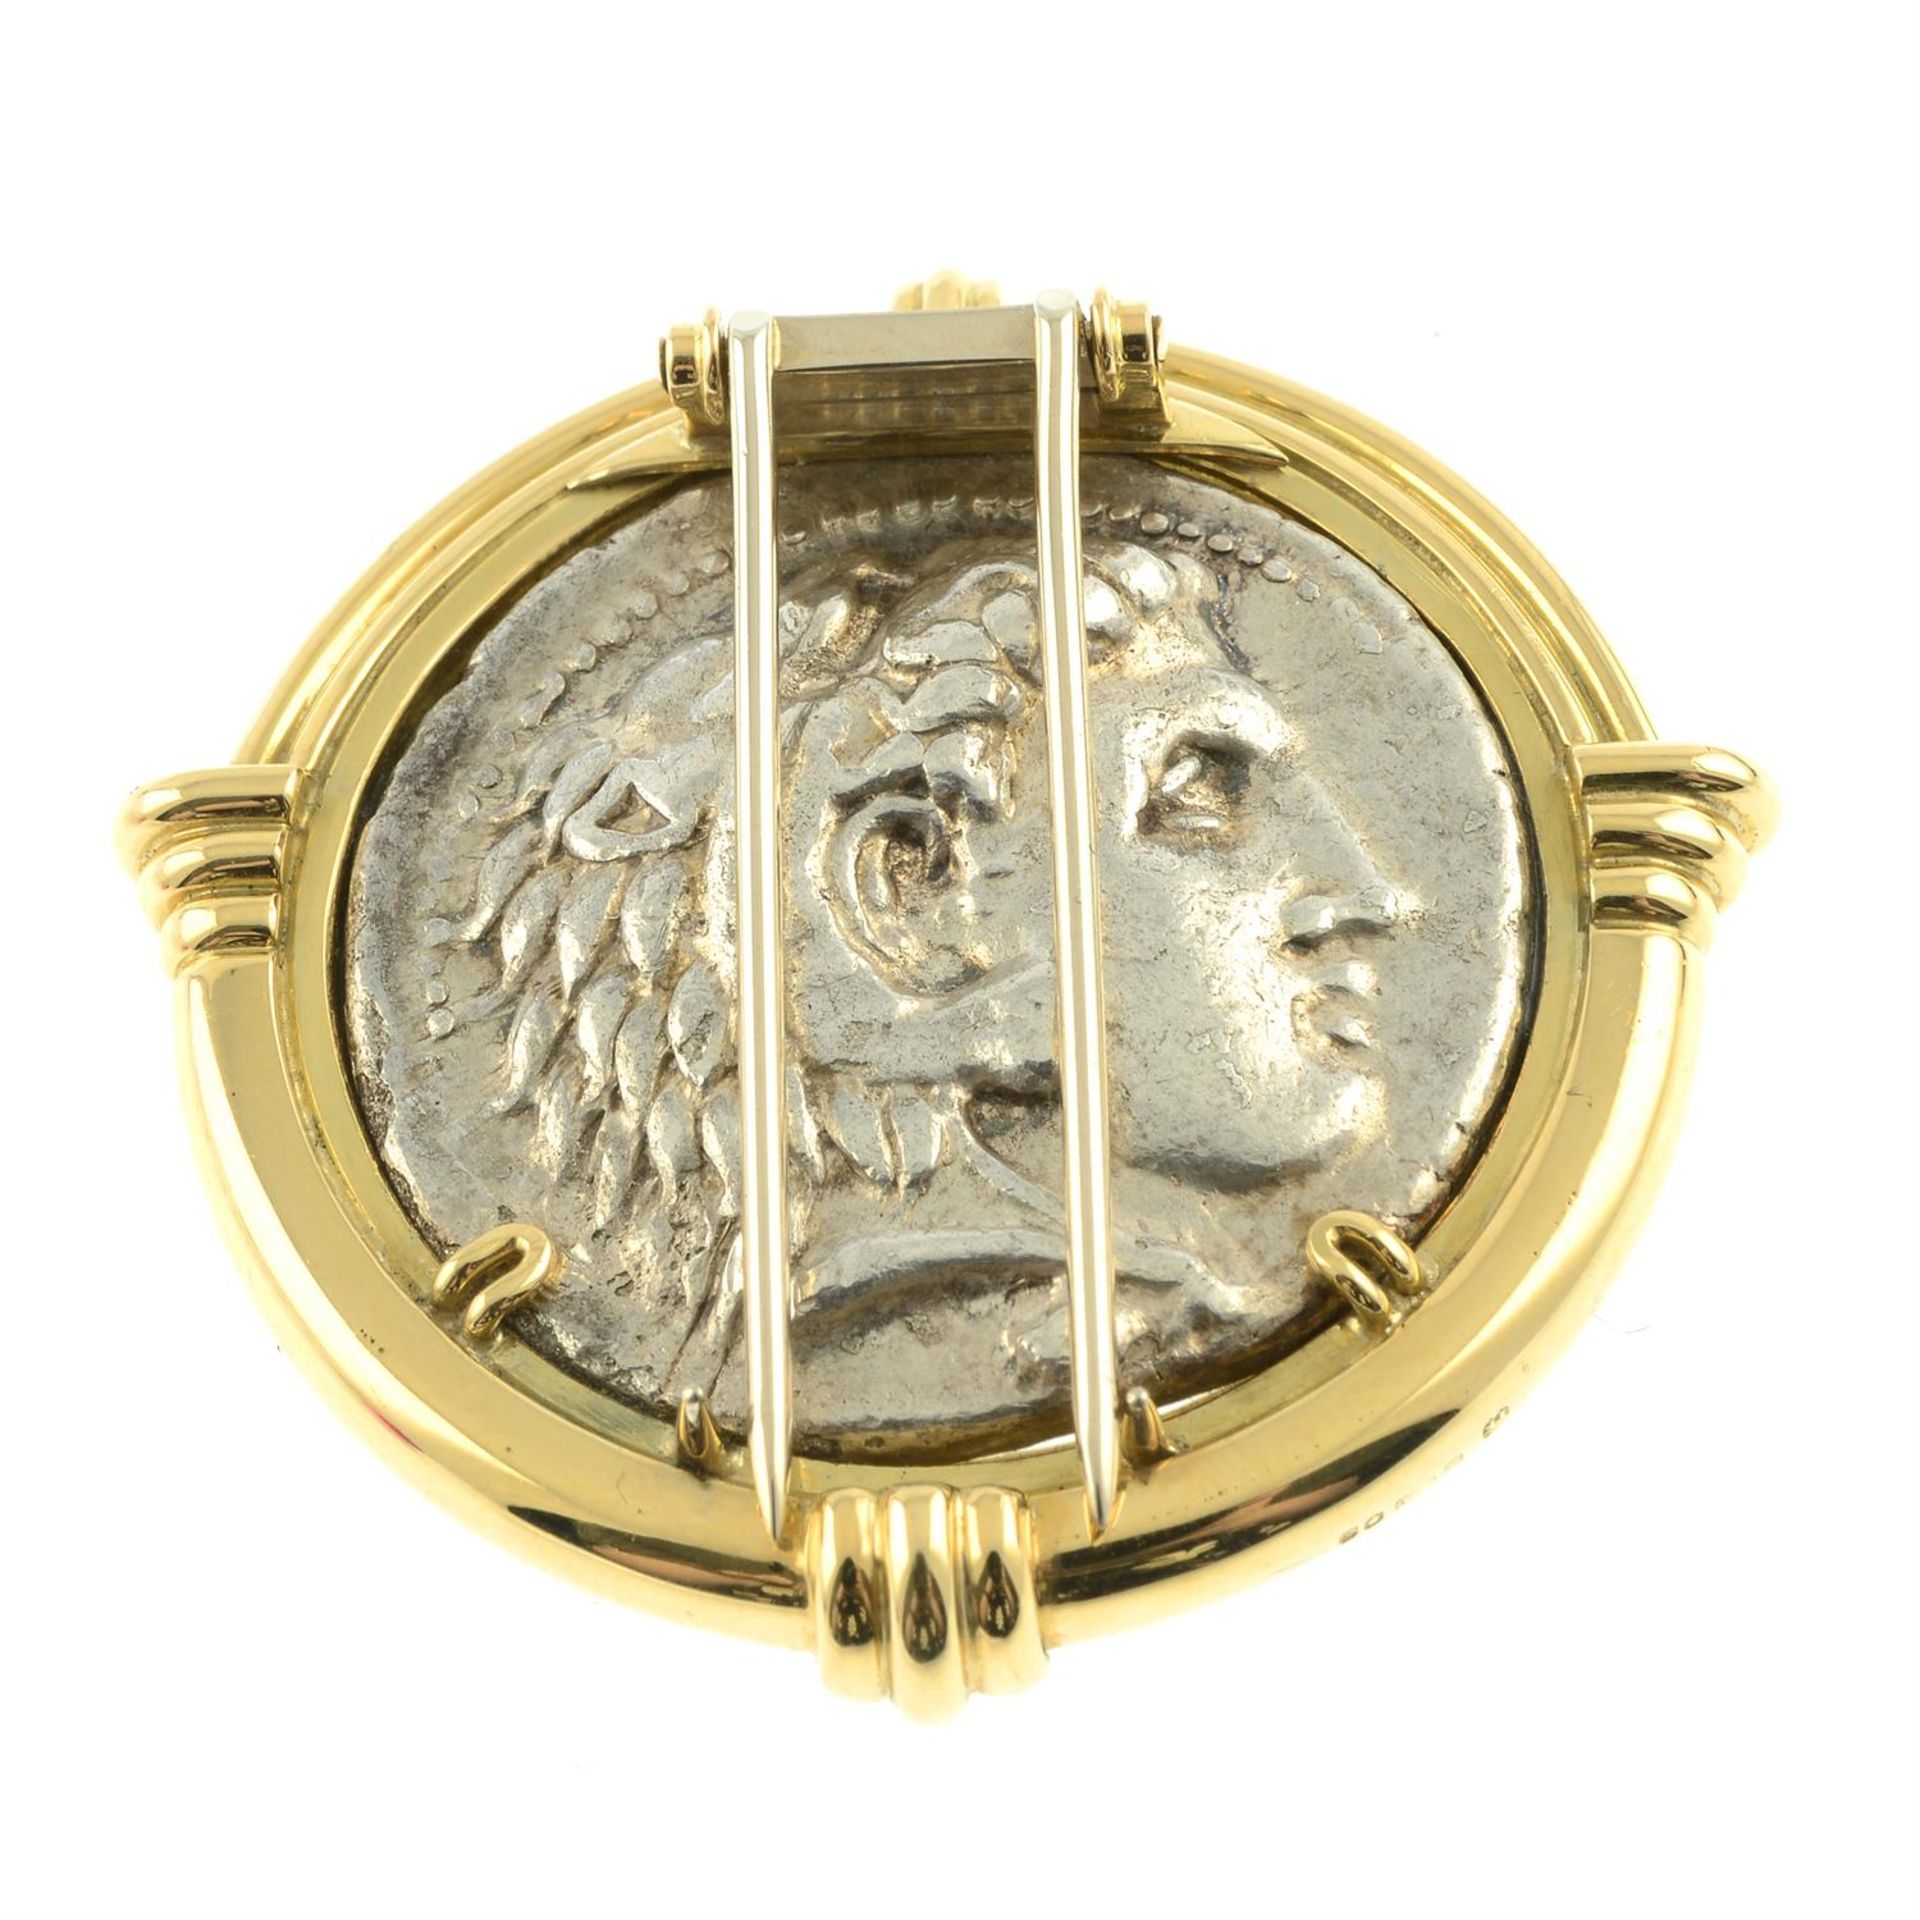 An unverified Greek or Macedonian coin or replica, mounted in an 18ct gold clip by Theo Fennell. - Image 3 of 4